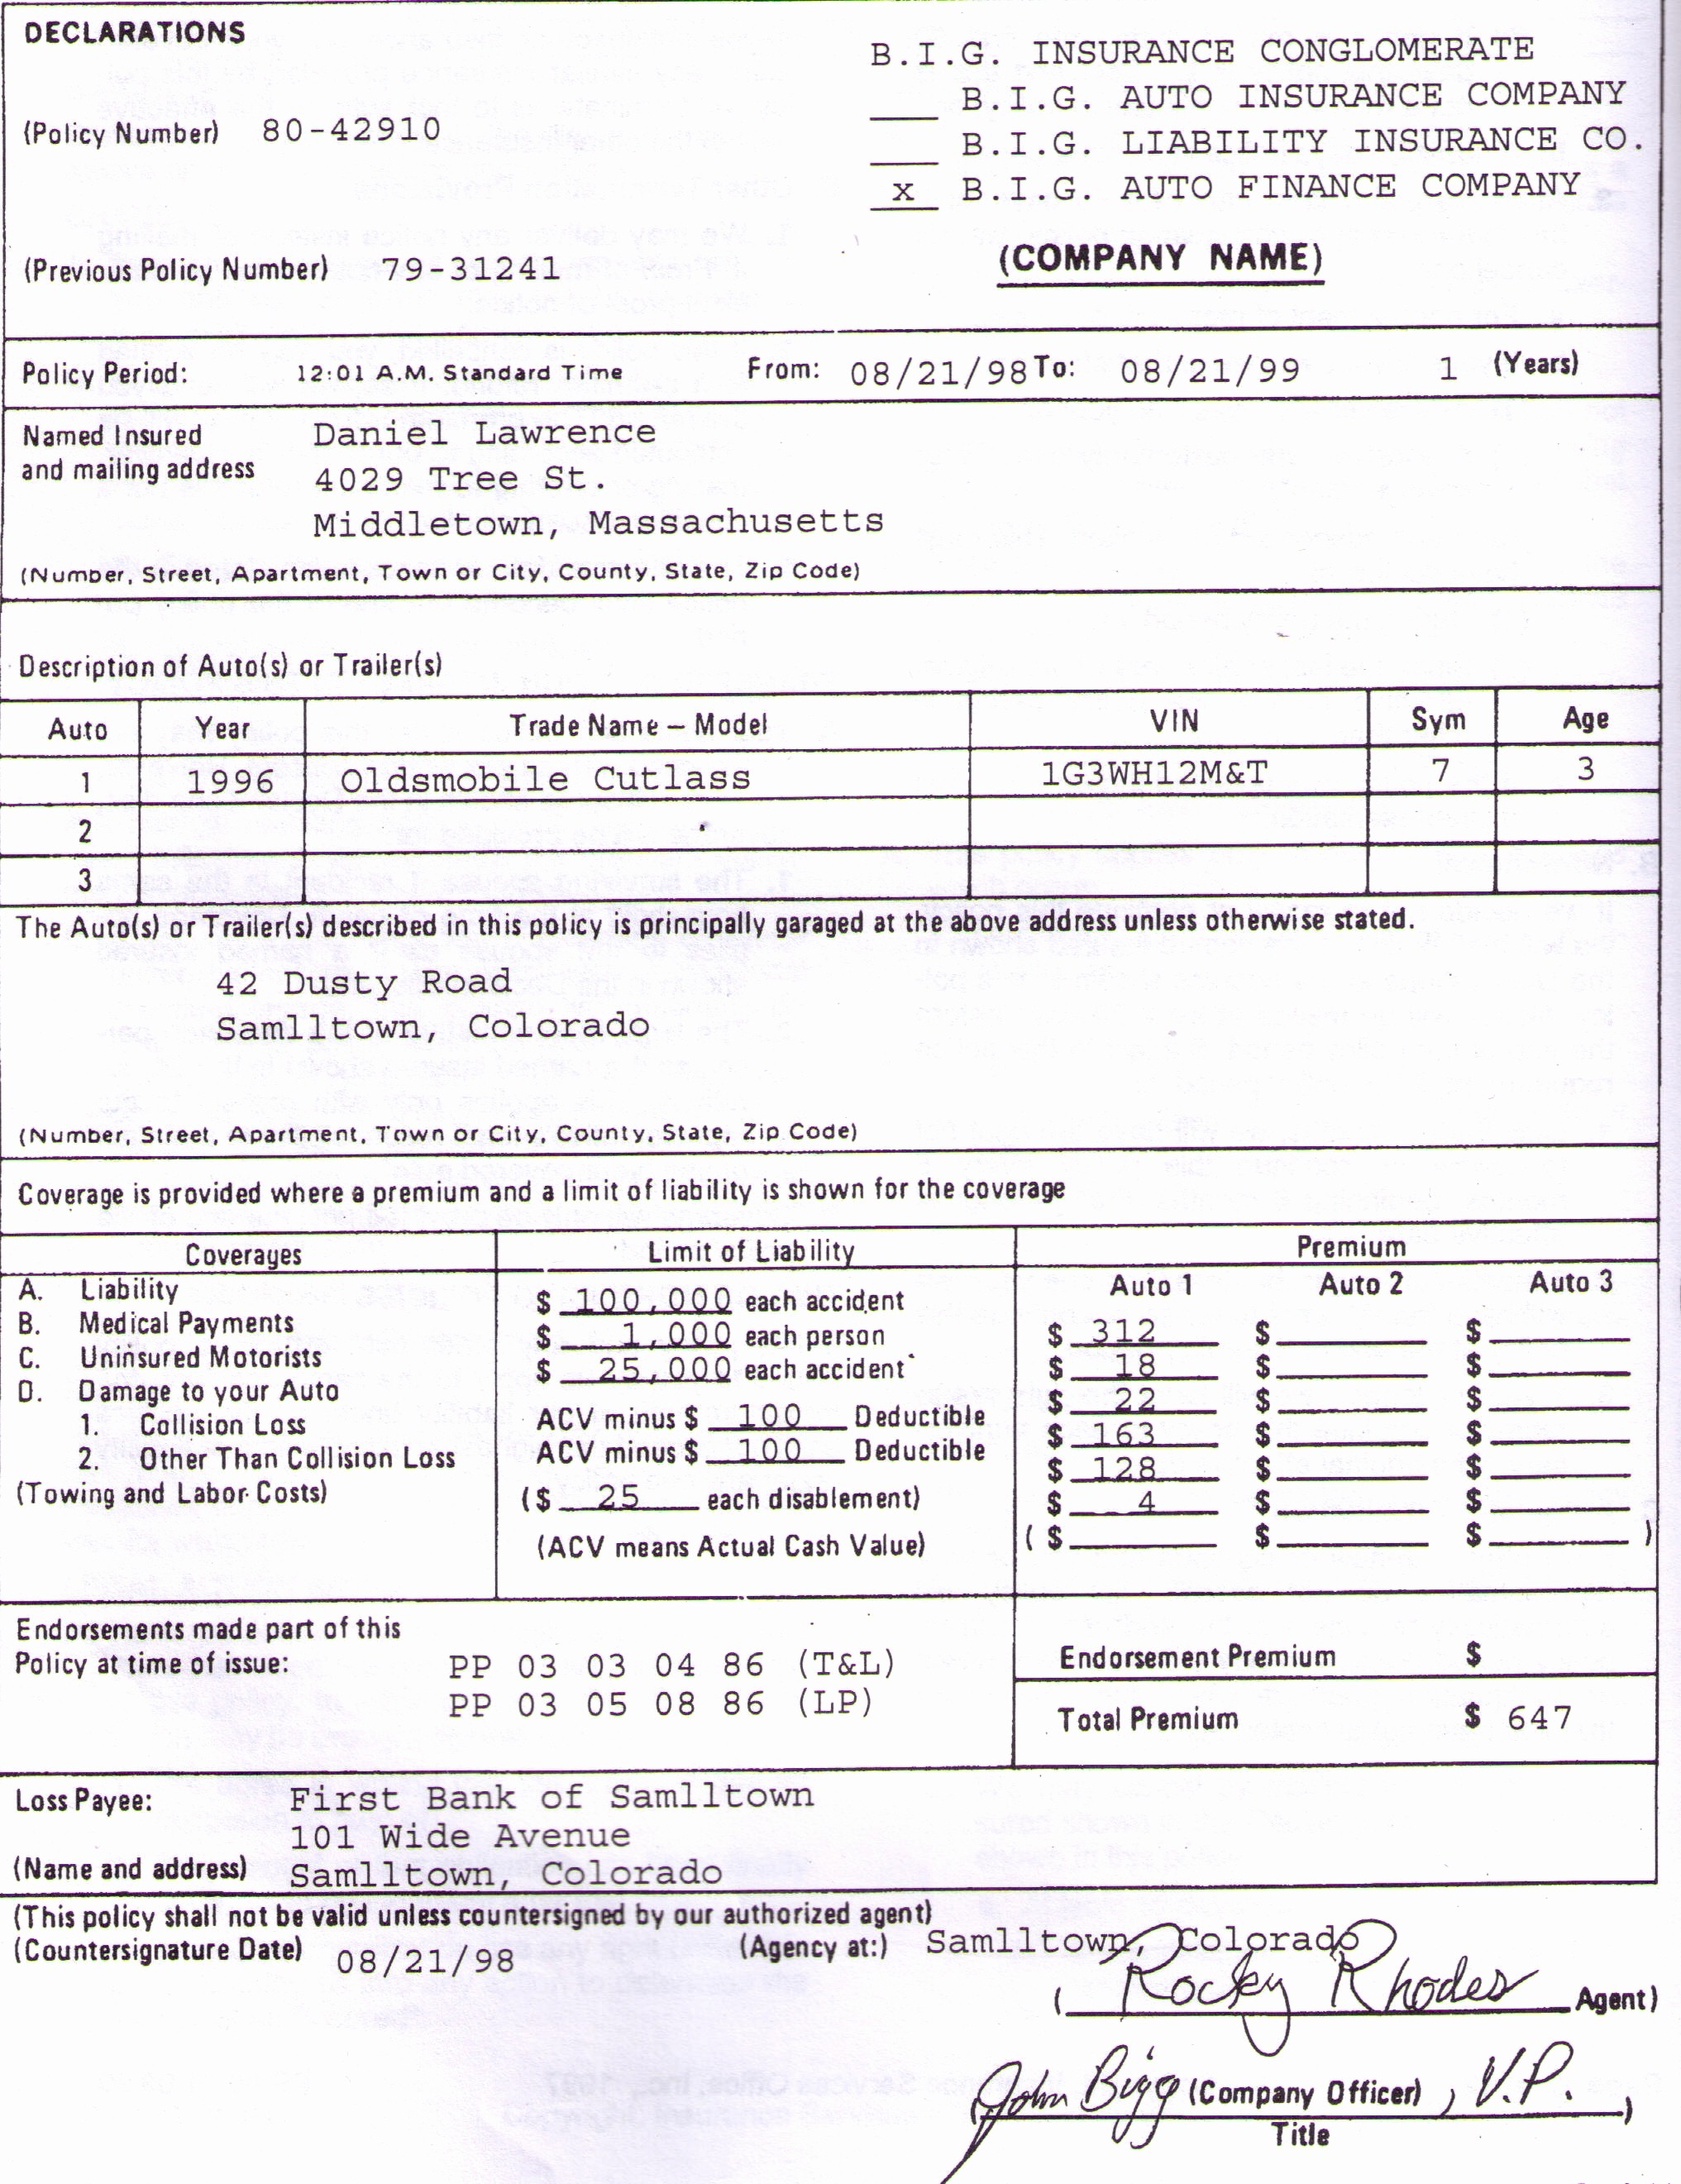 State Farm Declaration Page Sample Awesome Geico Home Insurance Document